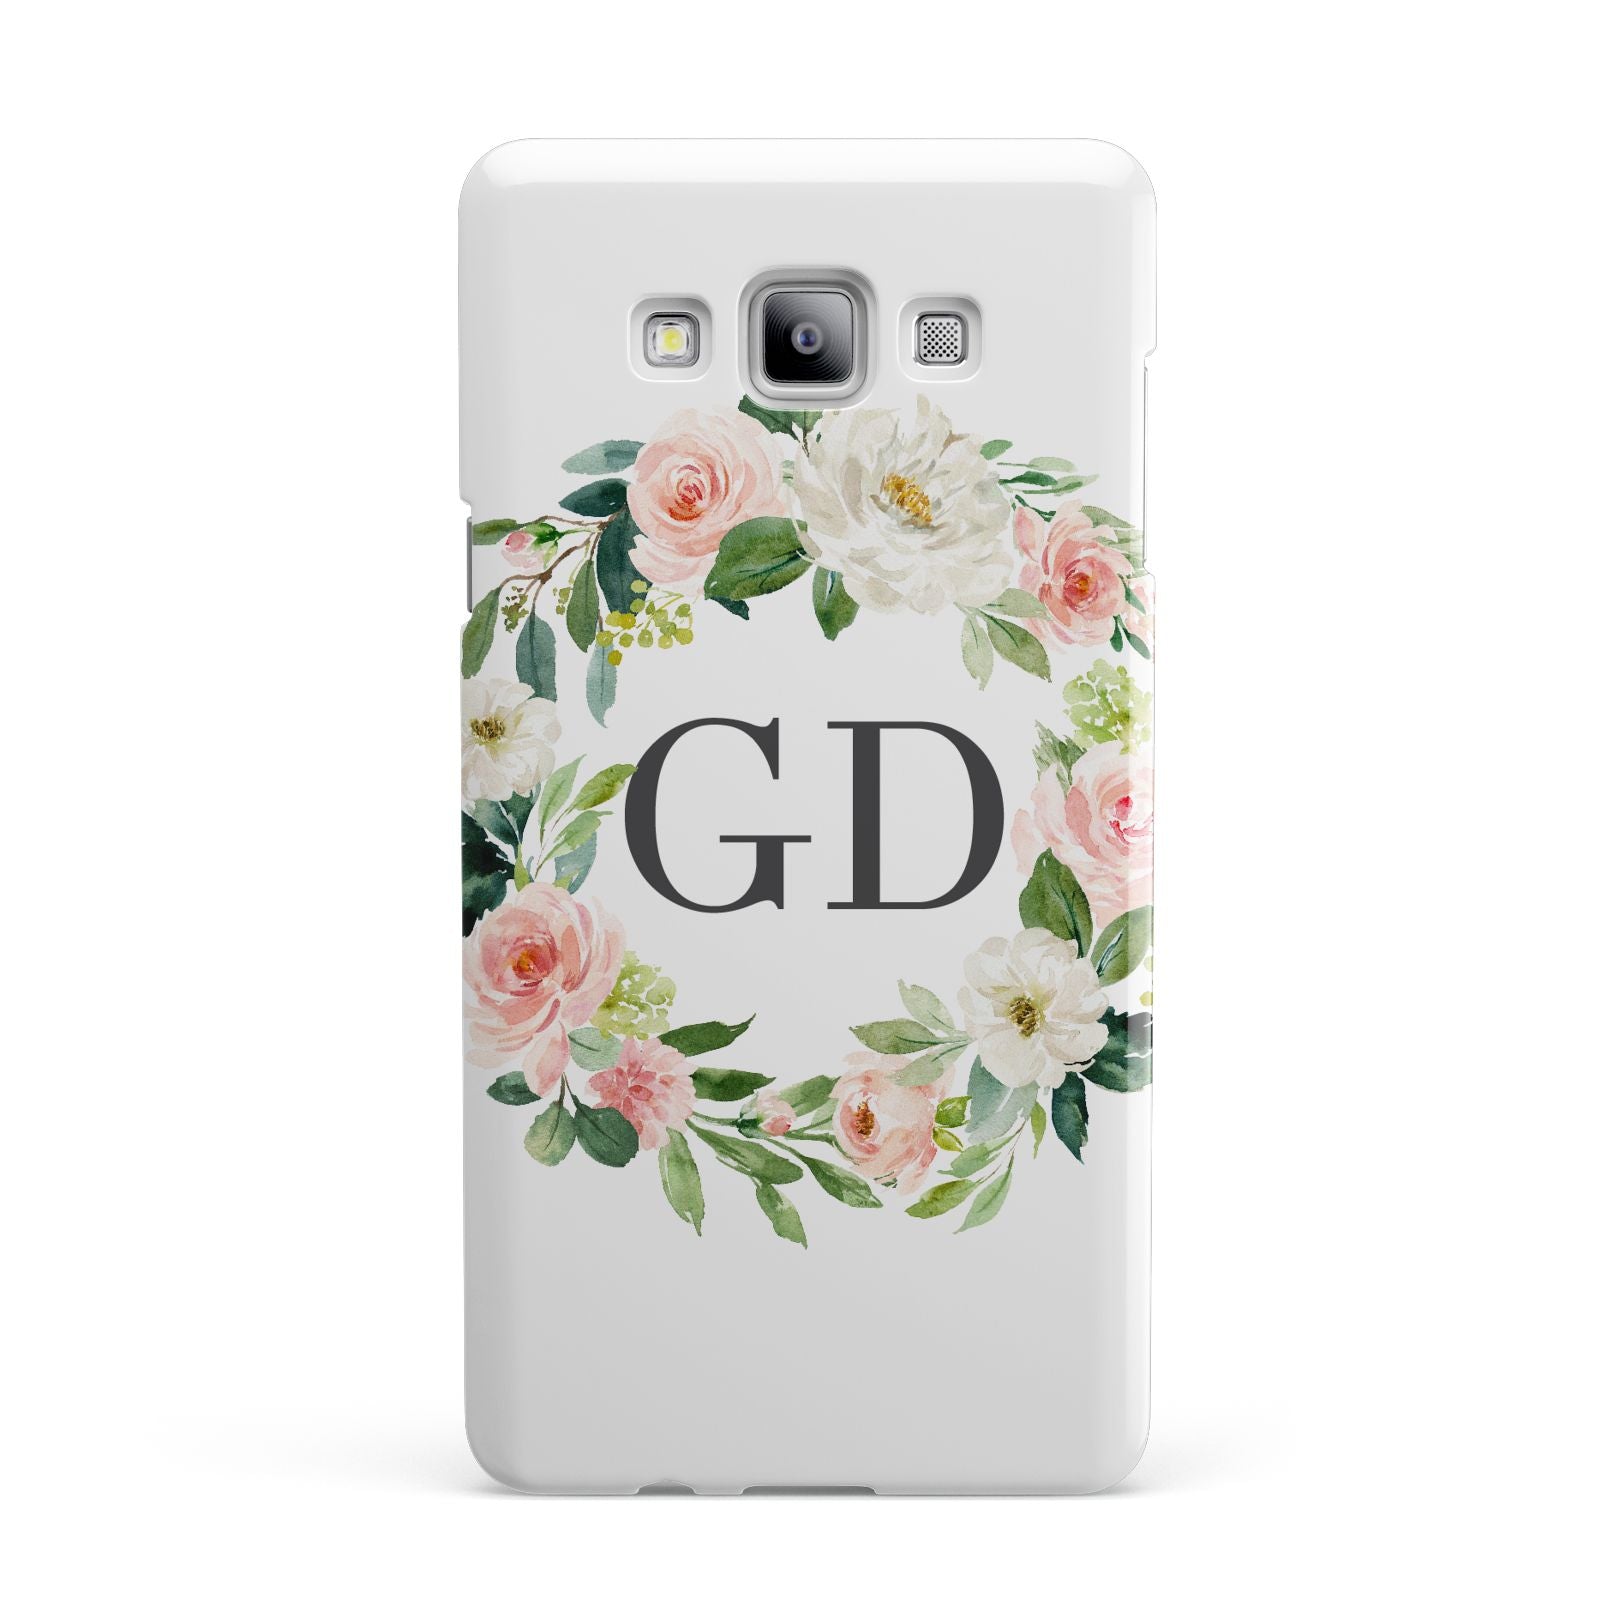 Personalised floral wreath Samsung Galaxy A7 2015 Case